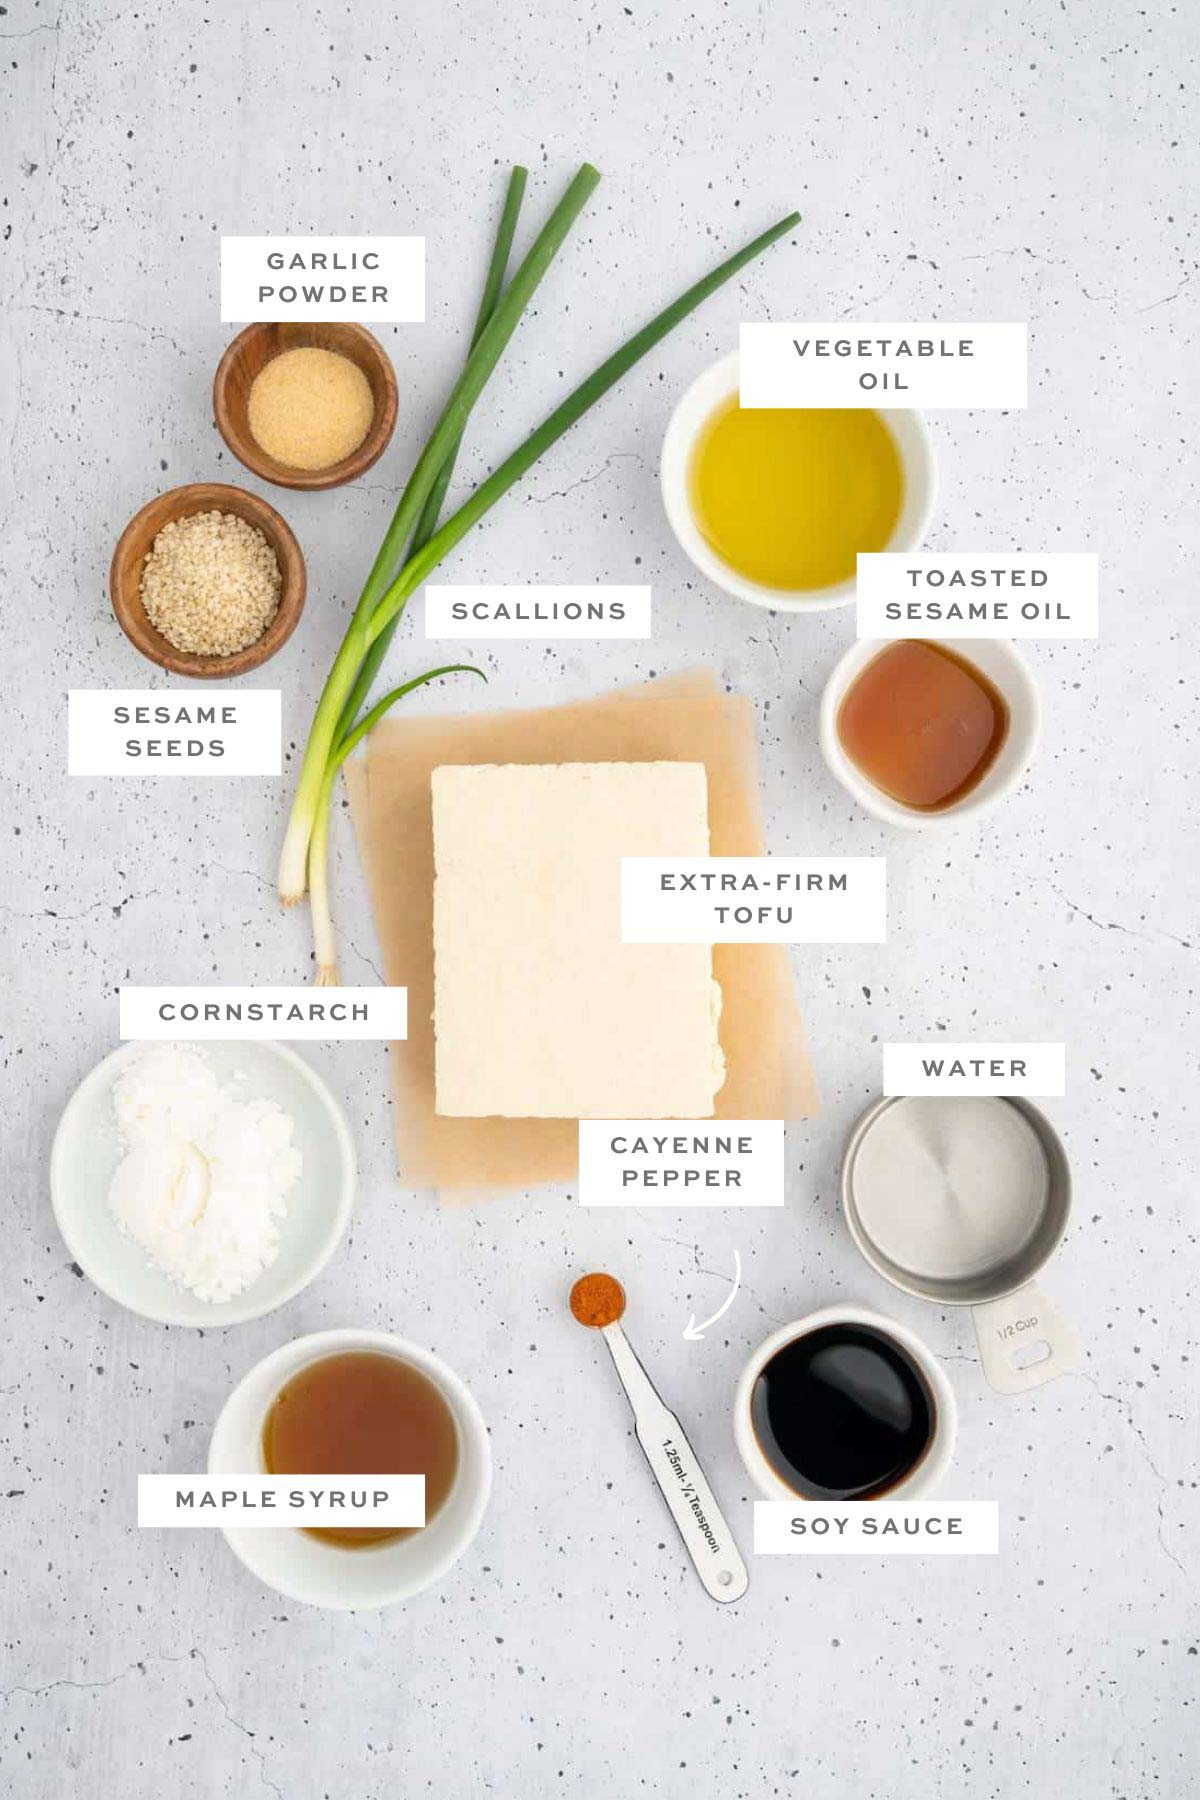 Key ingredients for Szechuan tofu with labels.